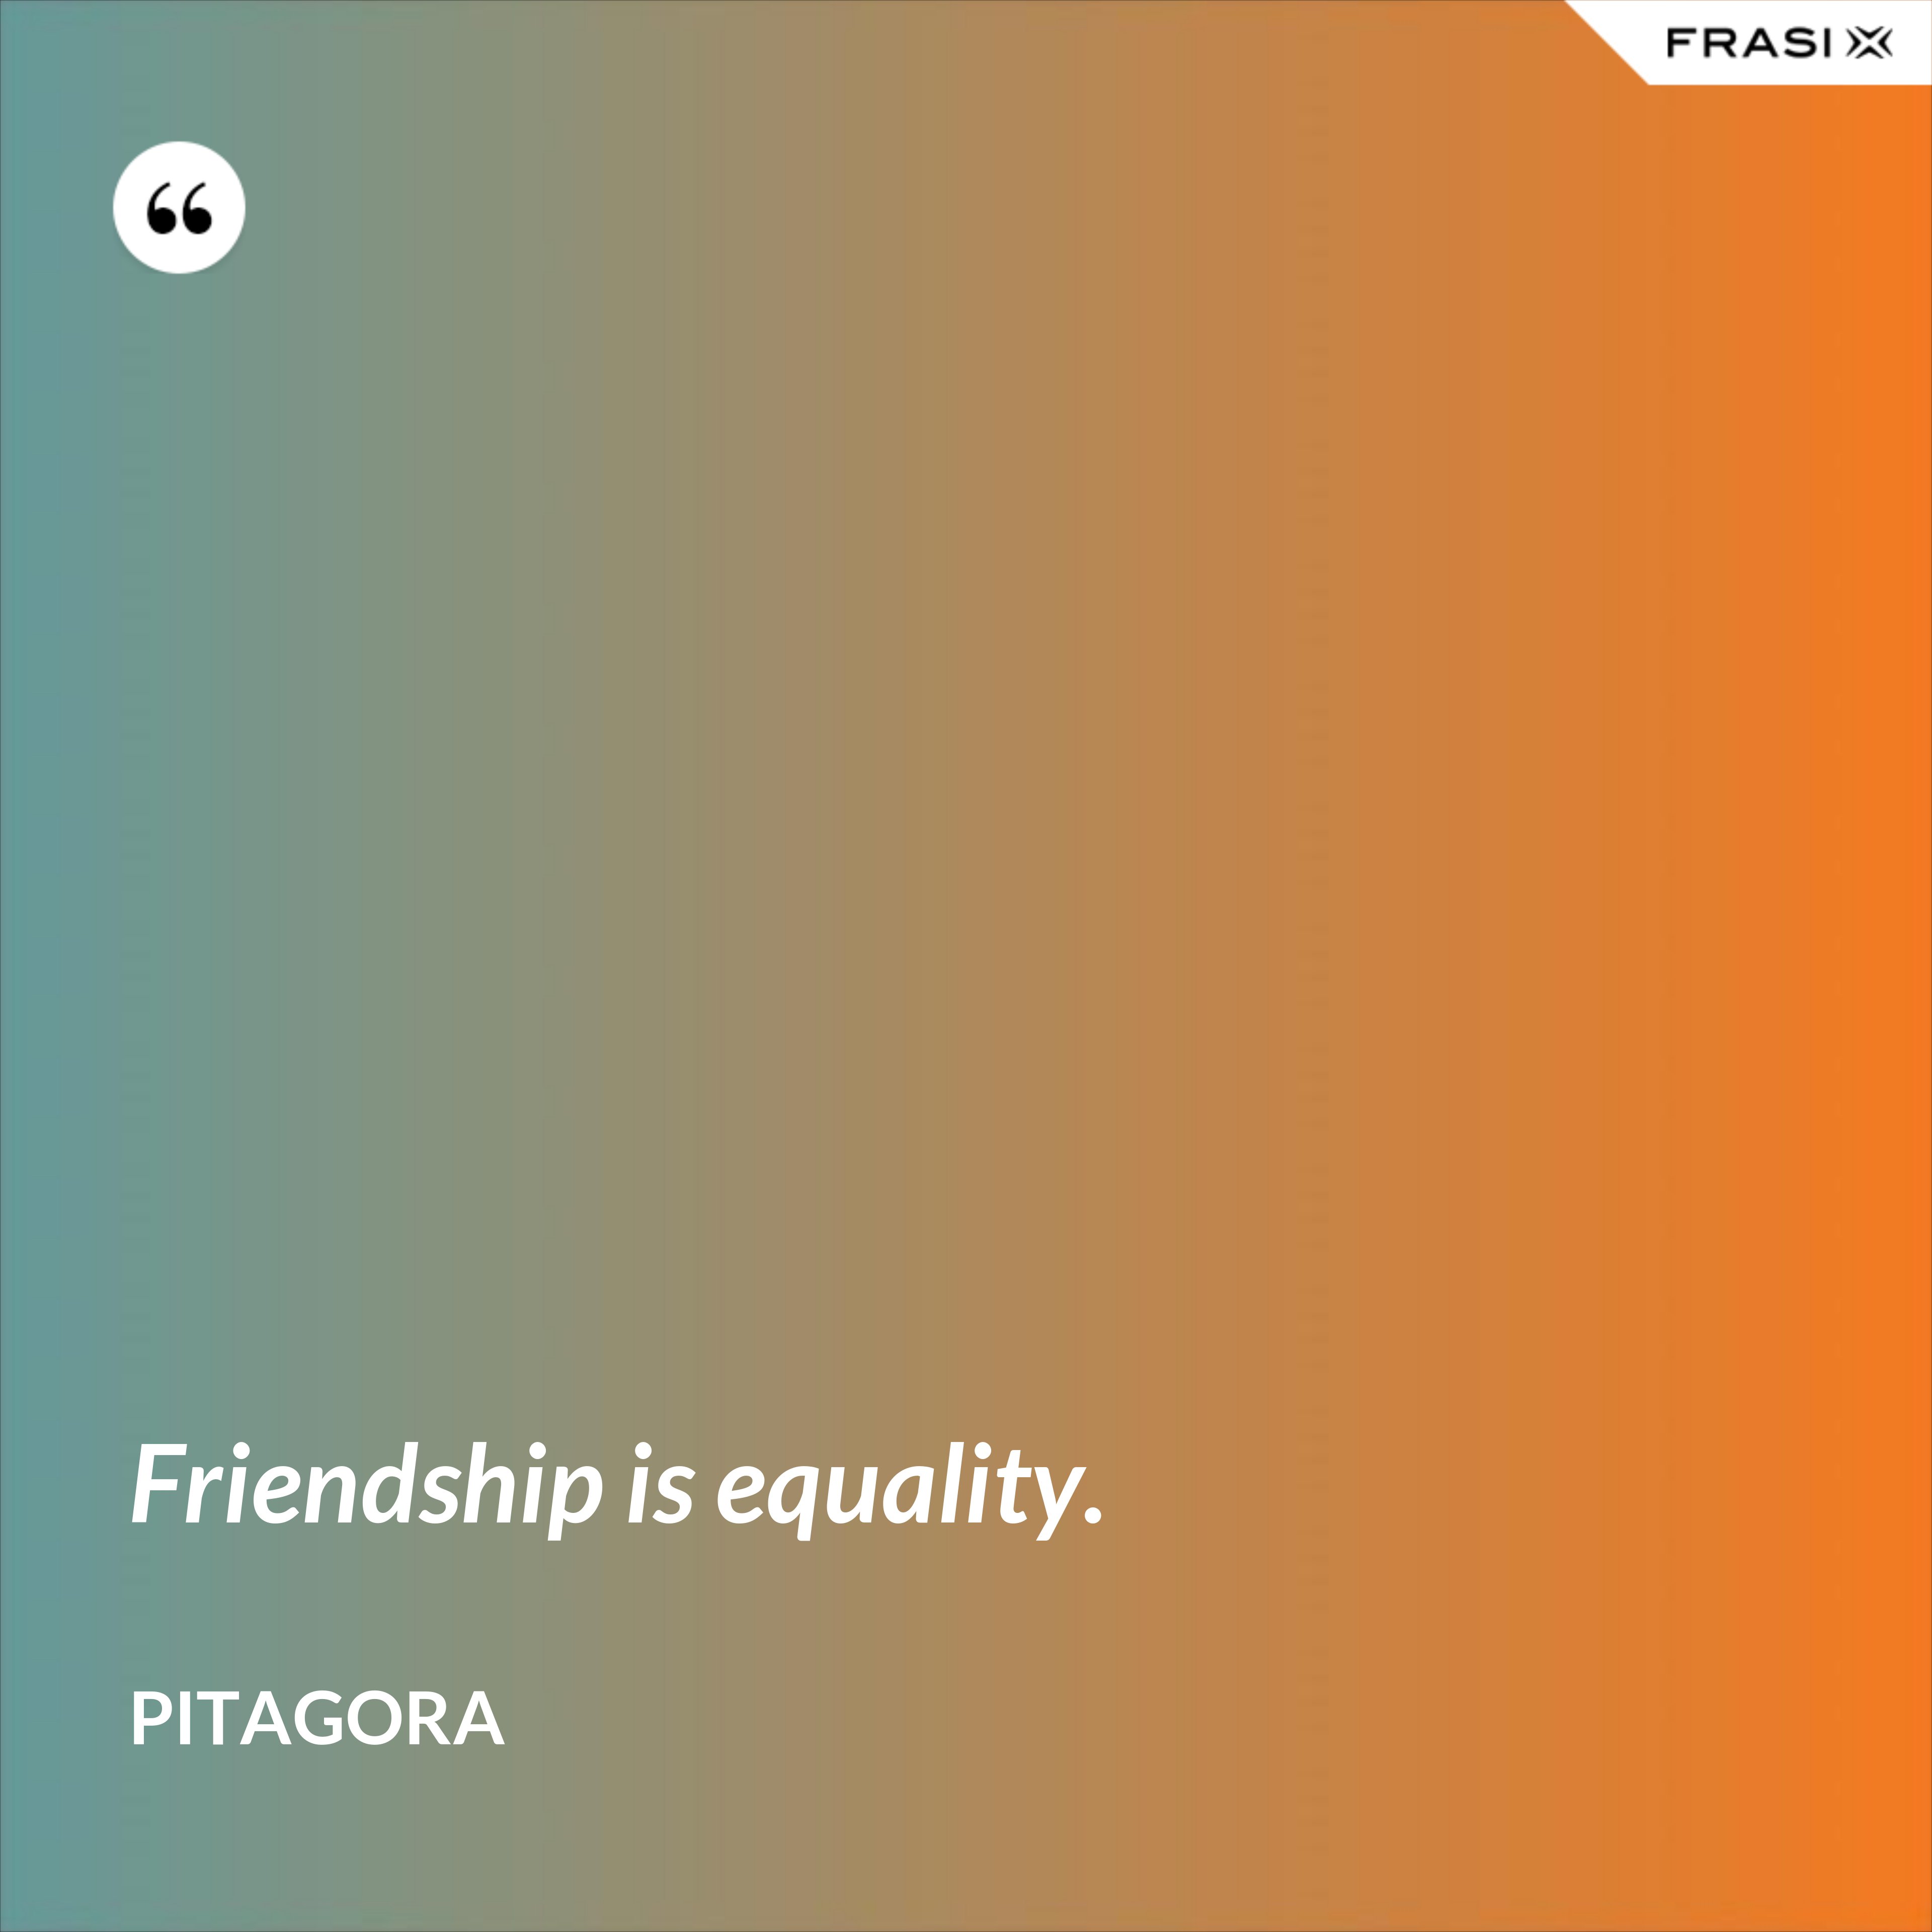 Friendship is equality. - Pitagora